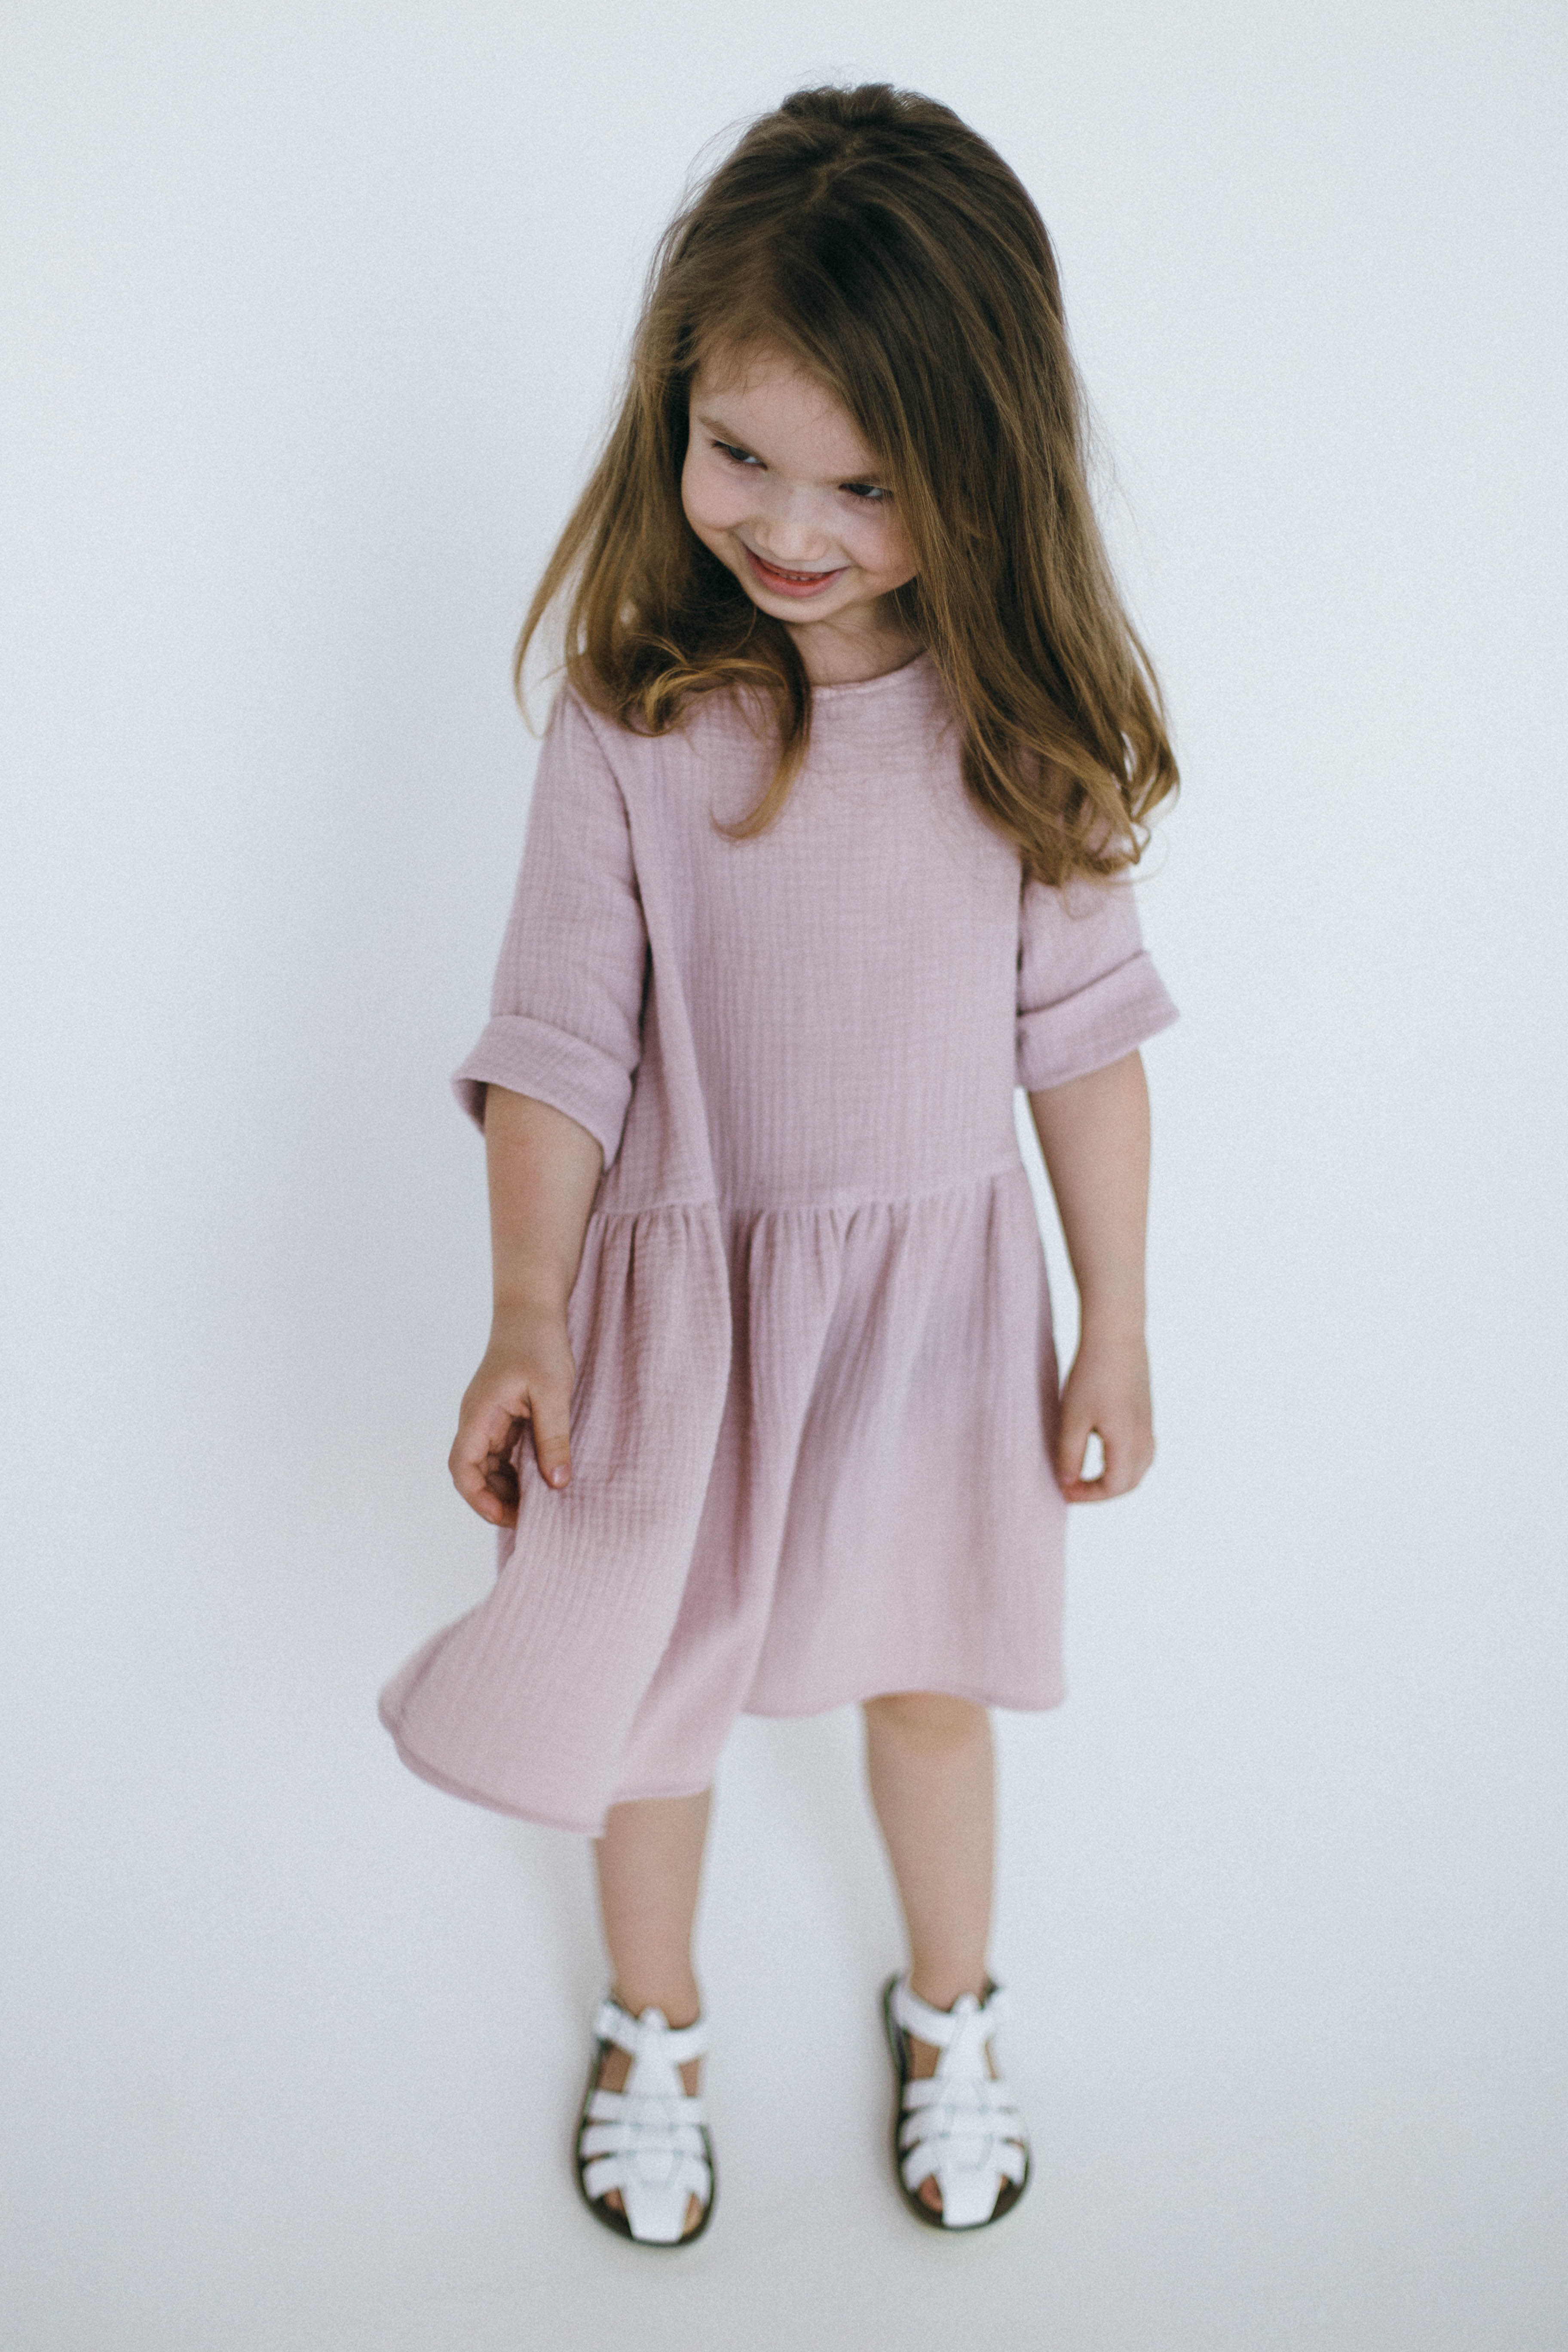 Beautifully handcraft our Back to Nature soft pink girls dress with 3/4 sleeves for cooler weather from organic cotton to bring you closer to nature with the freedom it gives you. This product is made of 100% organic cotton (GOTS).  This sustainable girls' dress is comfortable and soft. Mommy and Me styles are available.